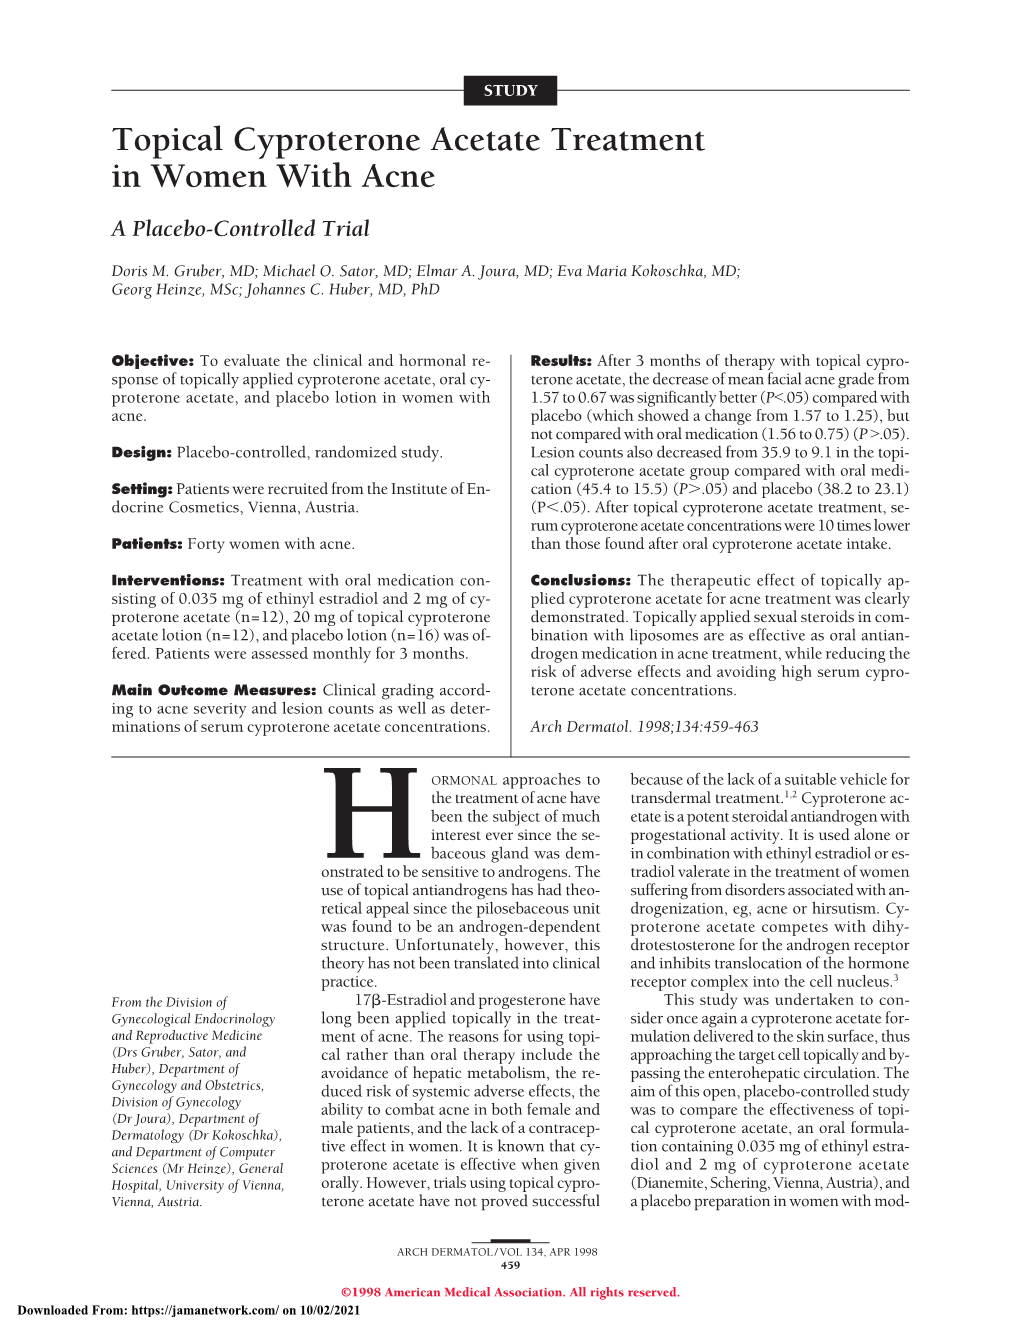 Topical Cyproterone Acetate Treatment in Women with Acne a Placebo-Controlled Trial